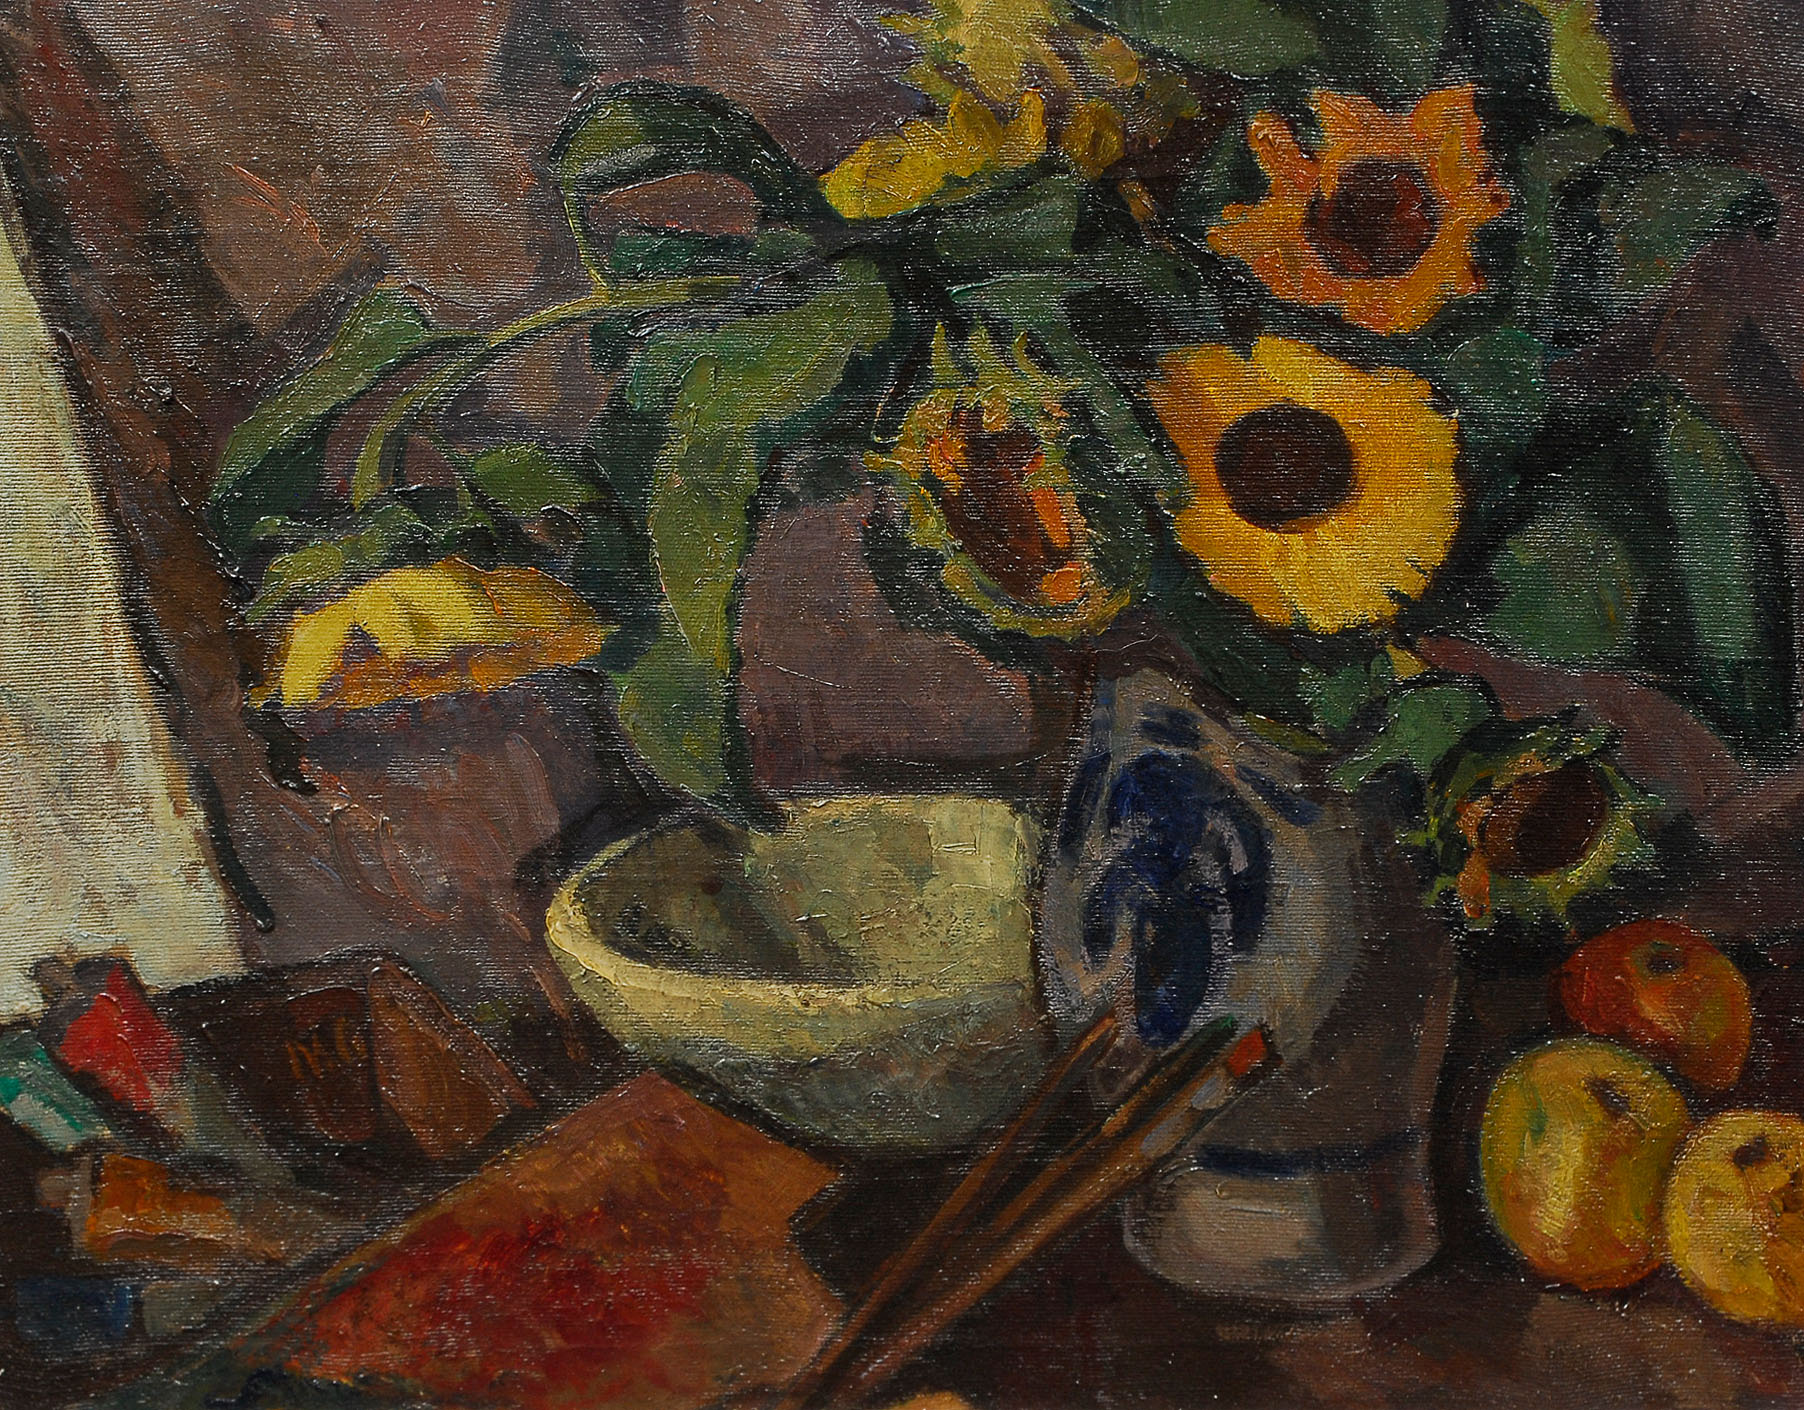 Still life with sunflowers, apples and painter's implement